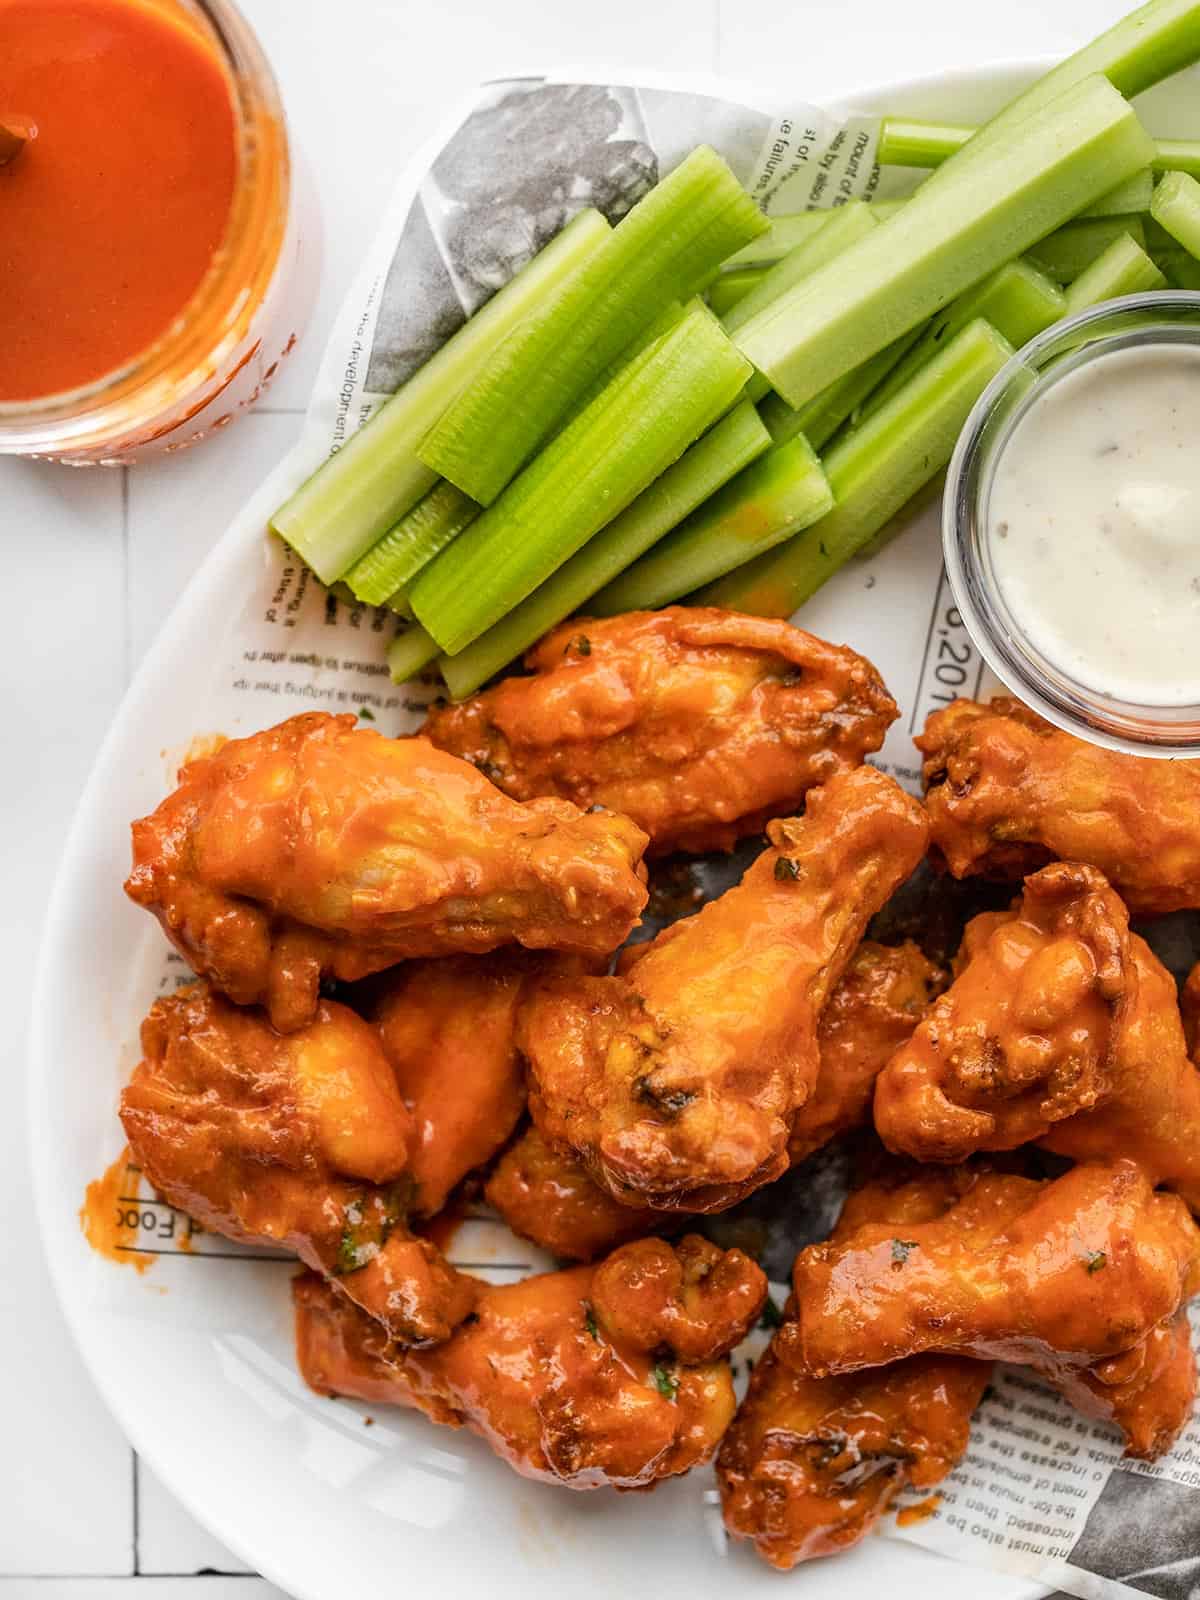 buffalo wings on a platter next to a jar of sauce